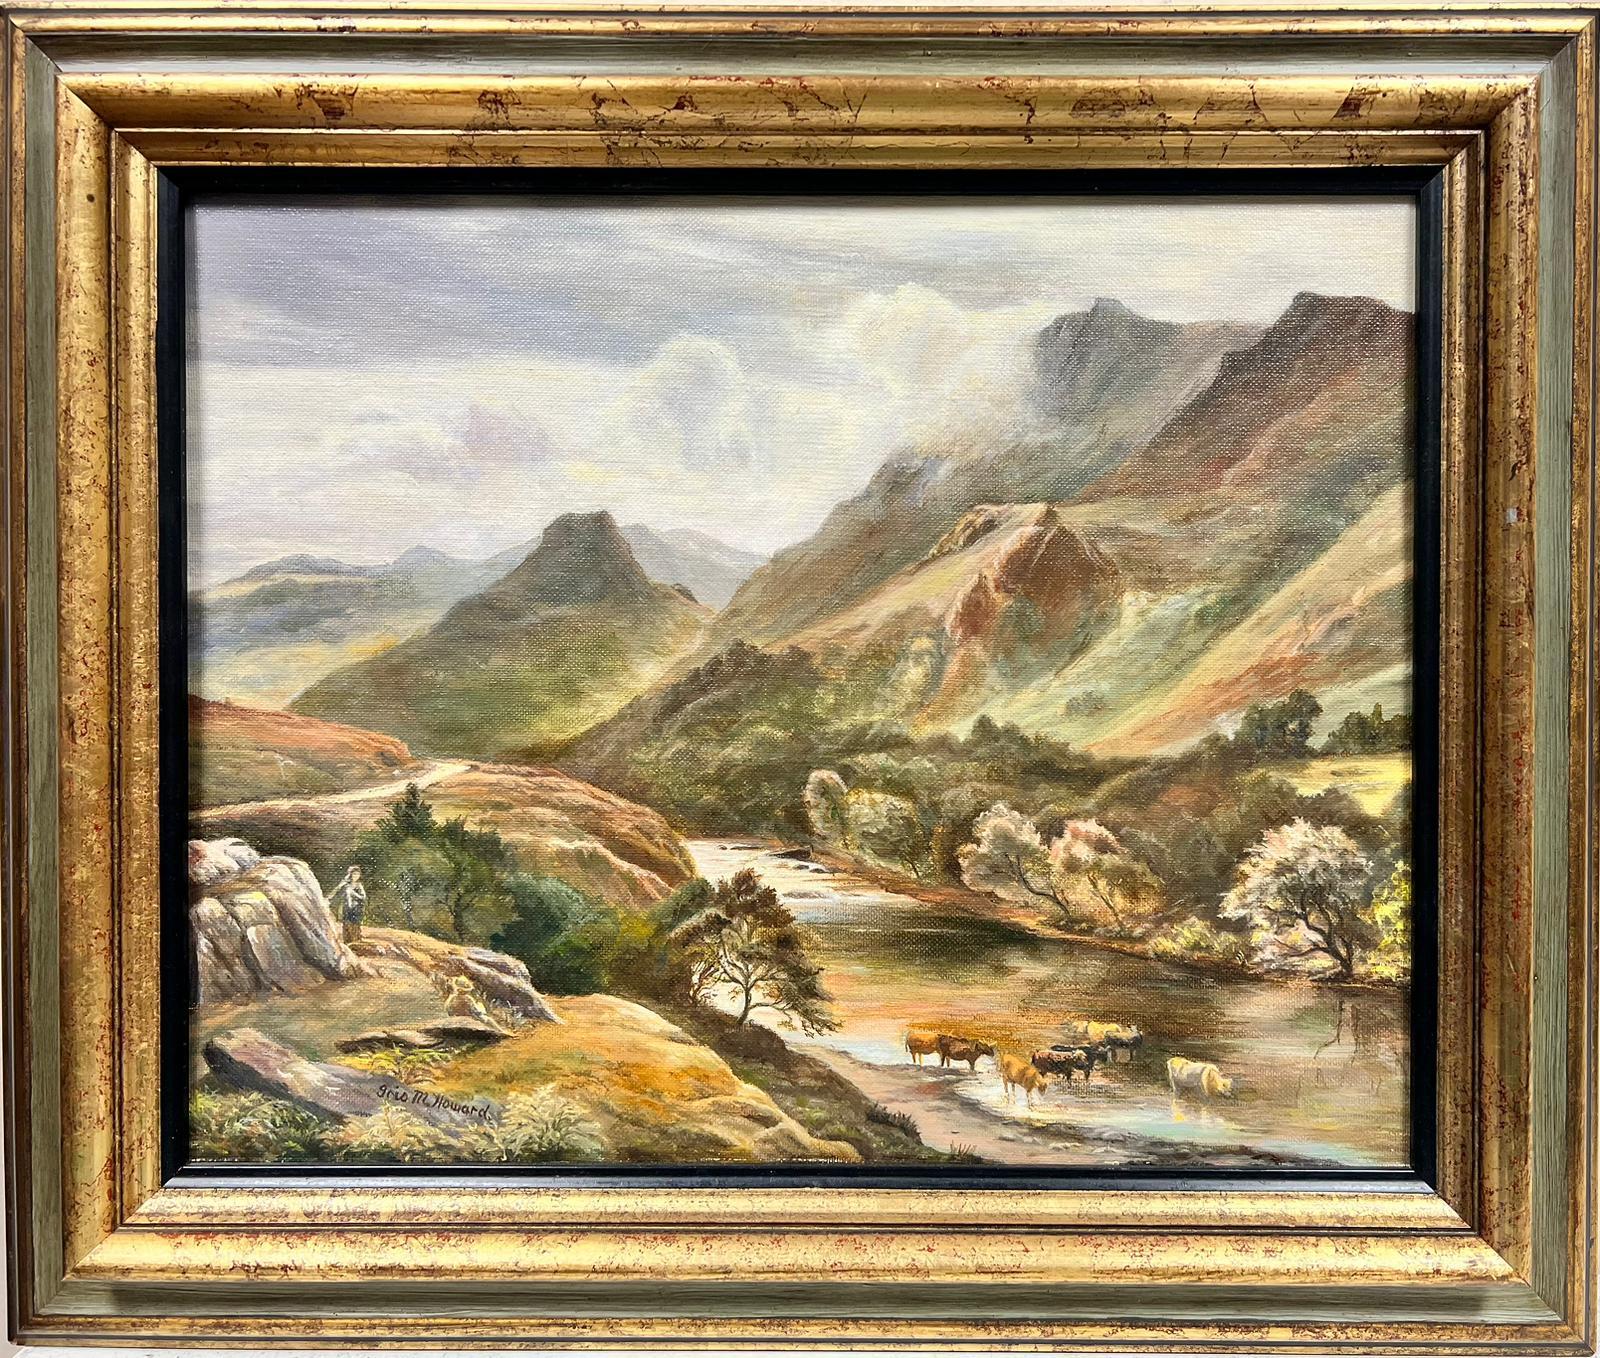 Artist/ School: British School, signed Iris M. Howard (after the painting by Sidney Percy). 

Title: The Lake District

Medium: oil on board, framed 

Framed: 16 x 20 inches
Painting: 14 x 18 inches

Provenance: private collection, UK

Condition: